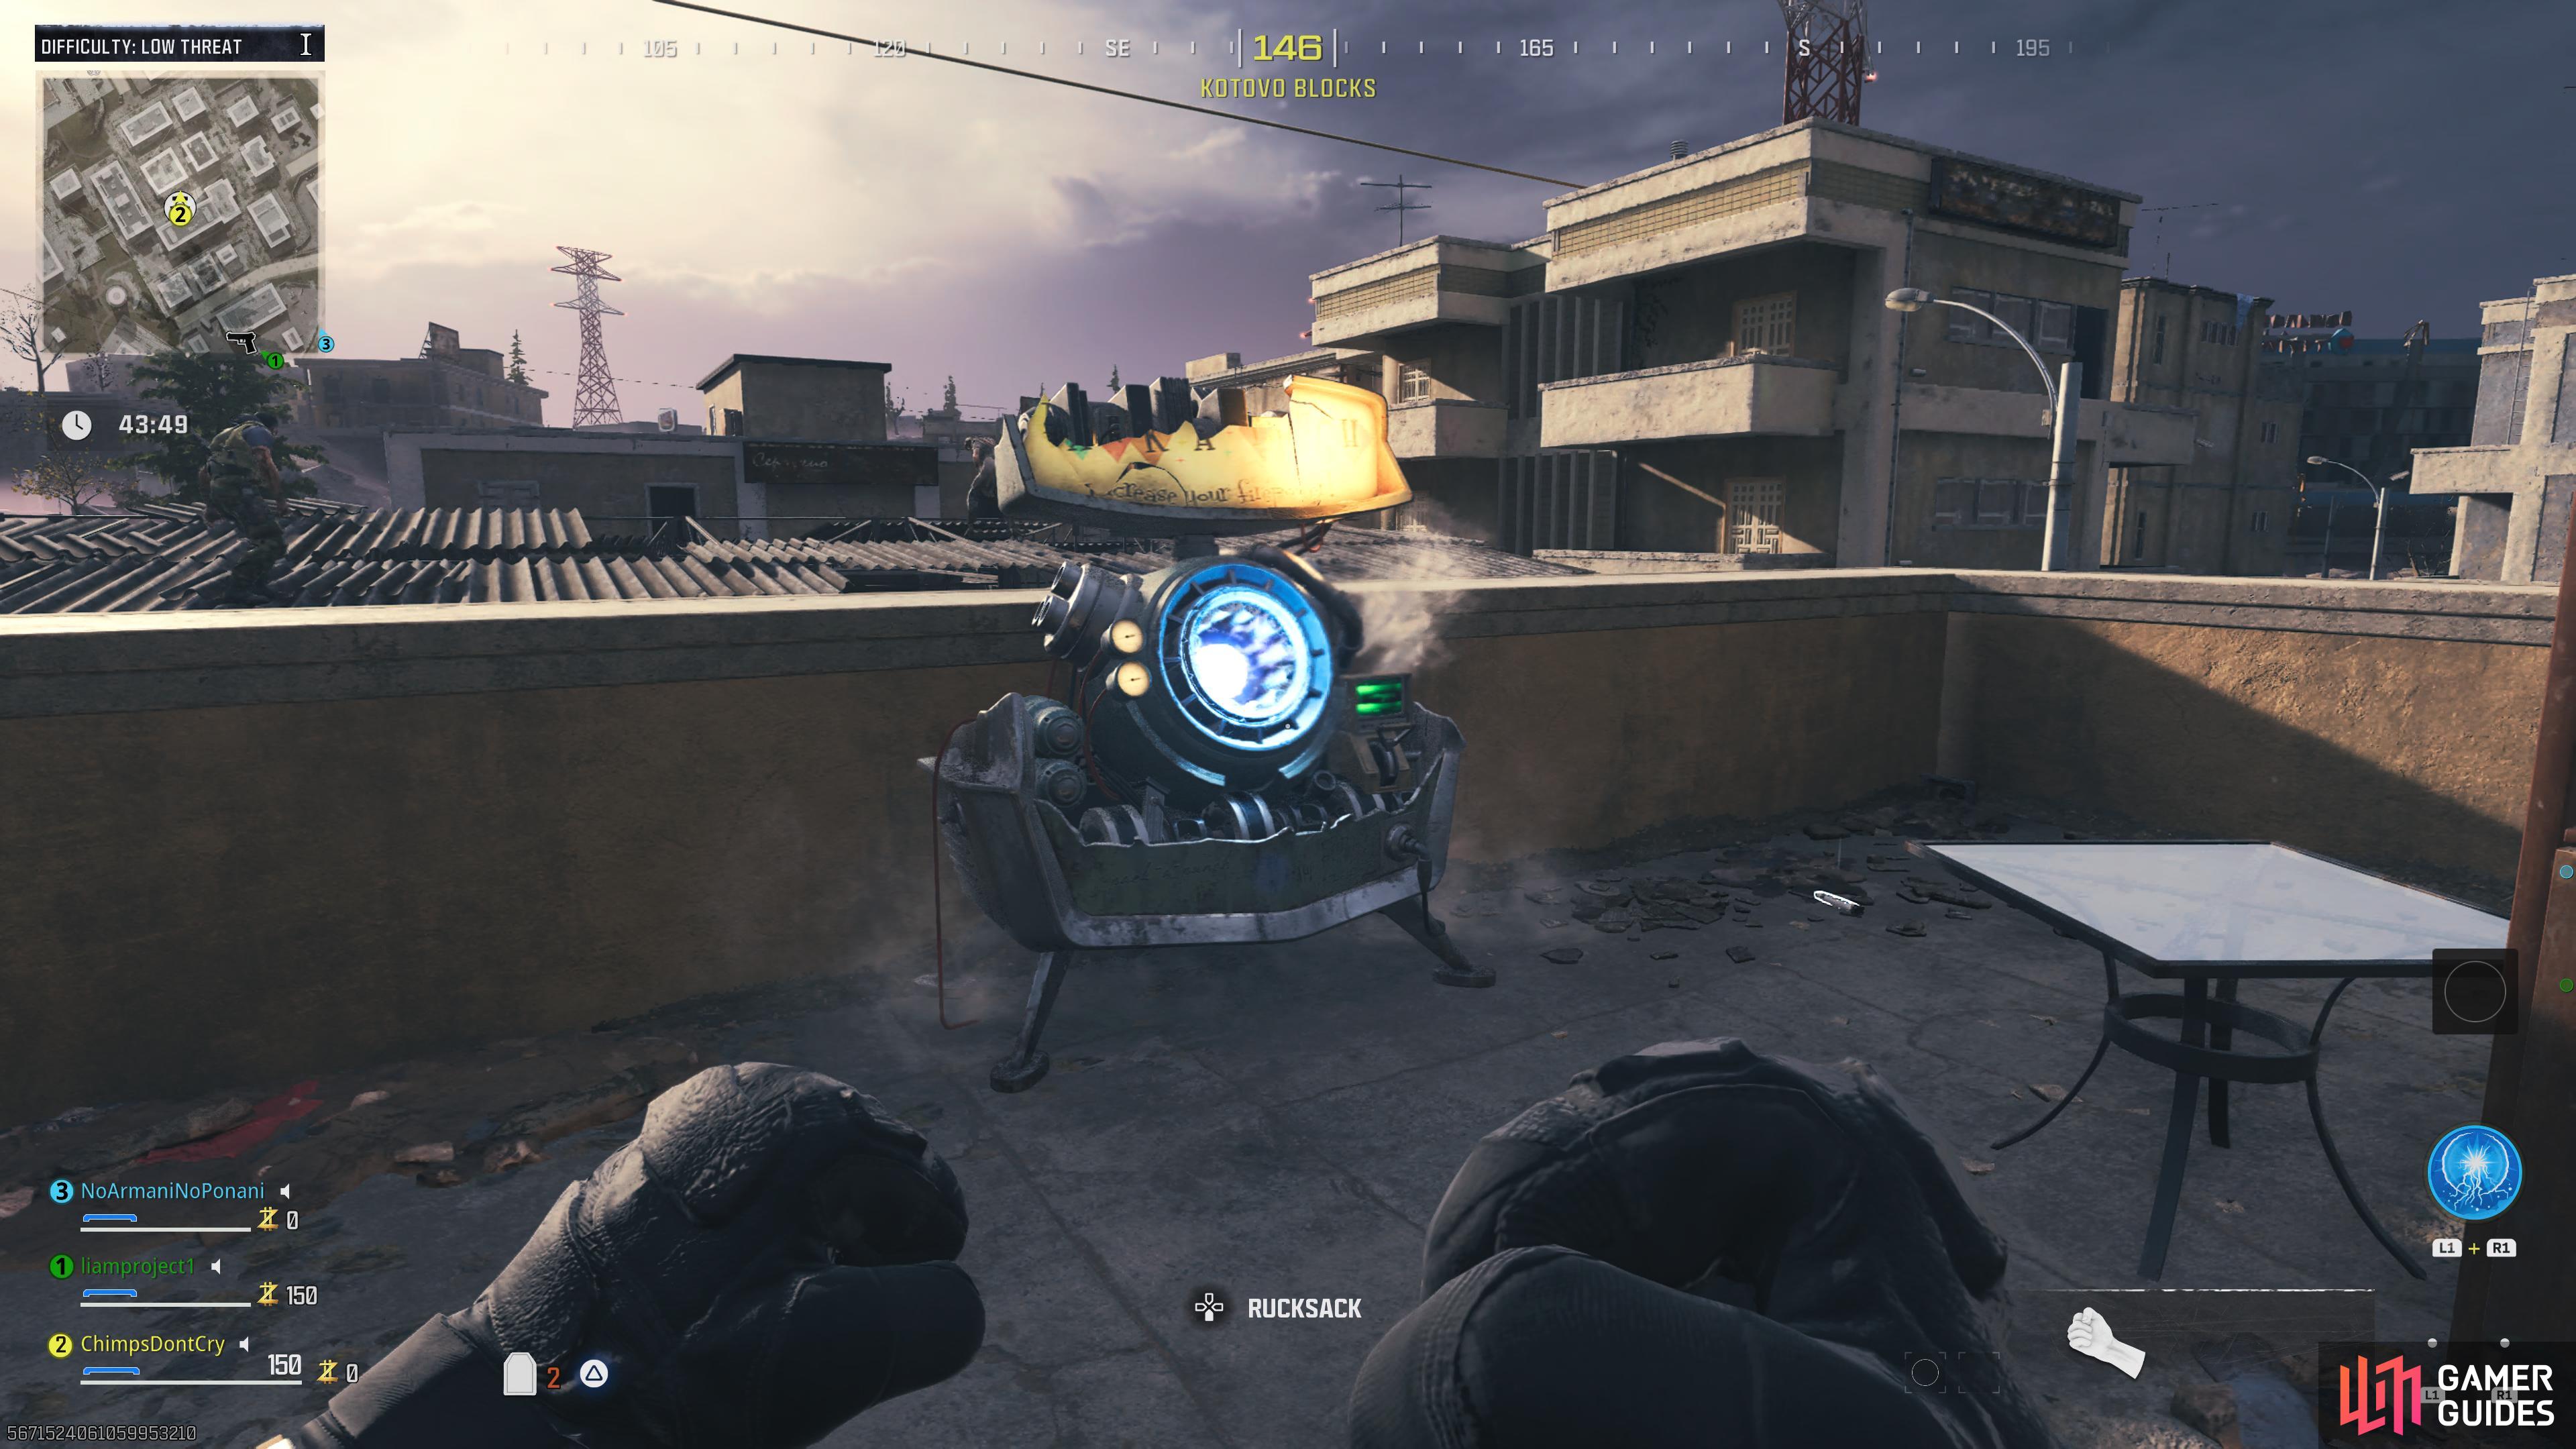 Pack-a-Punch Machines look like this in MW3.